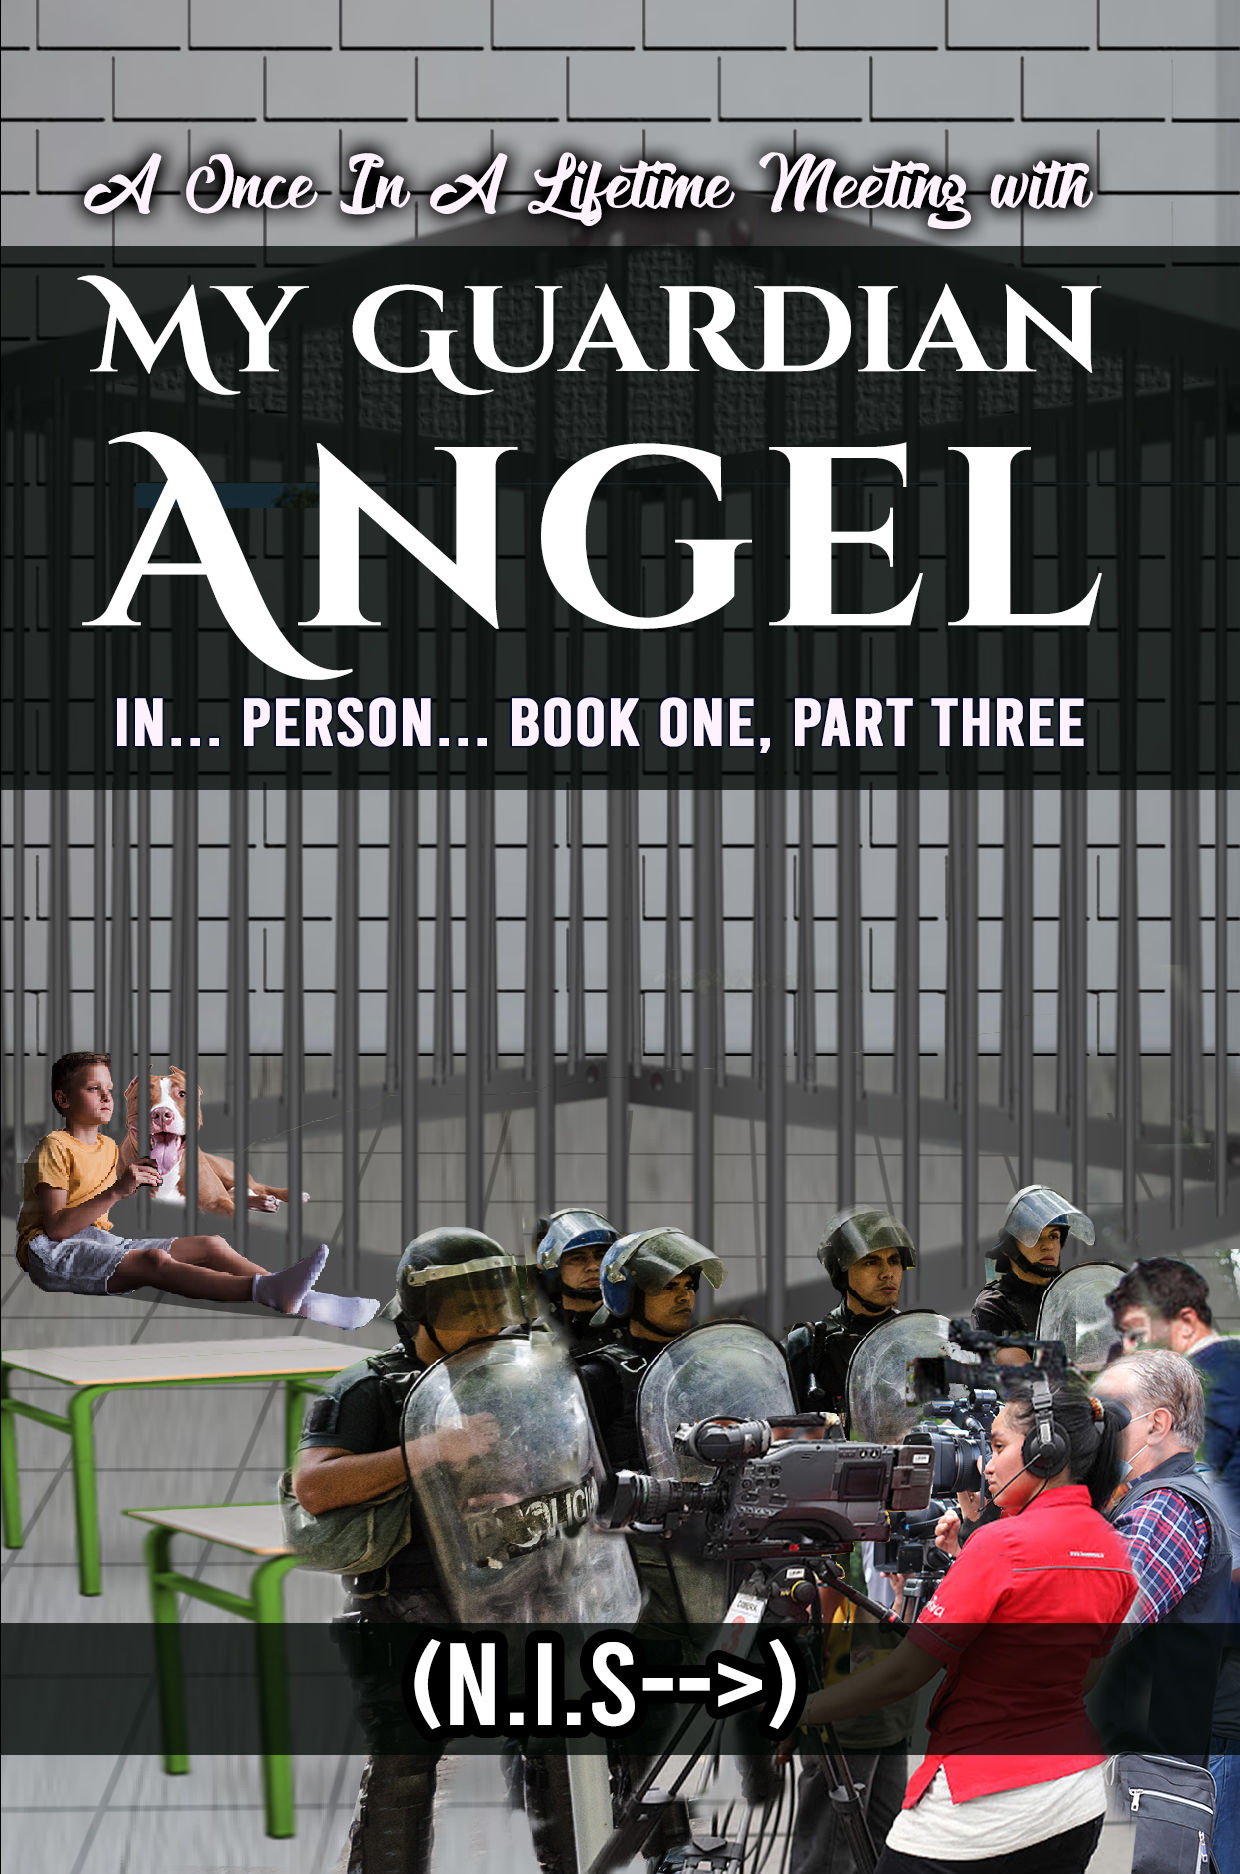 A ONCE IN A LIFETIME MEETING WITH MY GUARDIAN ANGEL... IN... PERSON... BOOK ONE, PART THREE